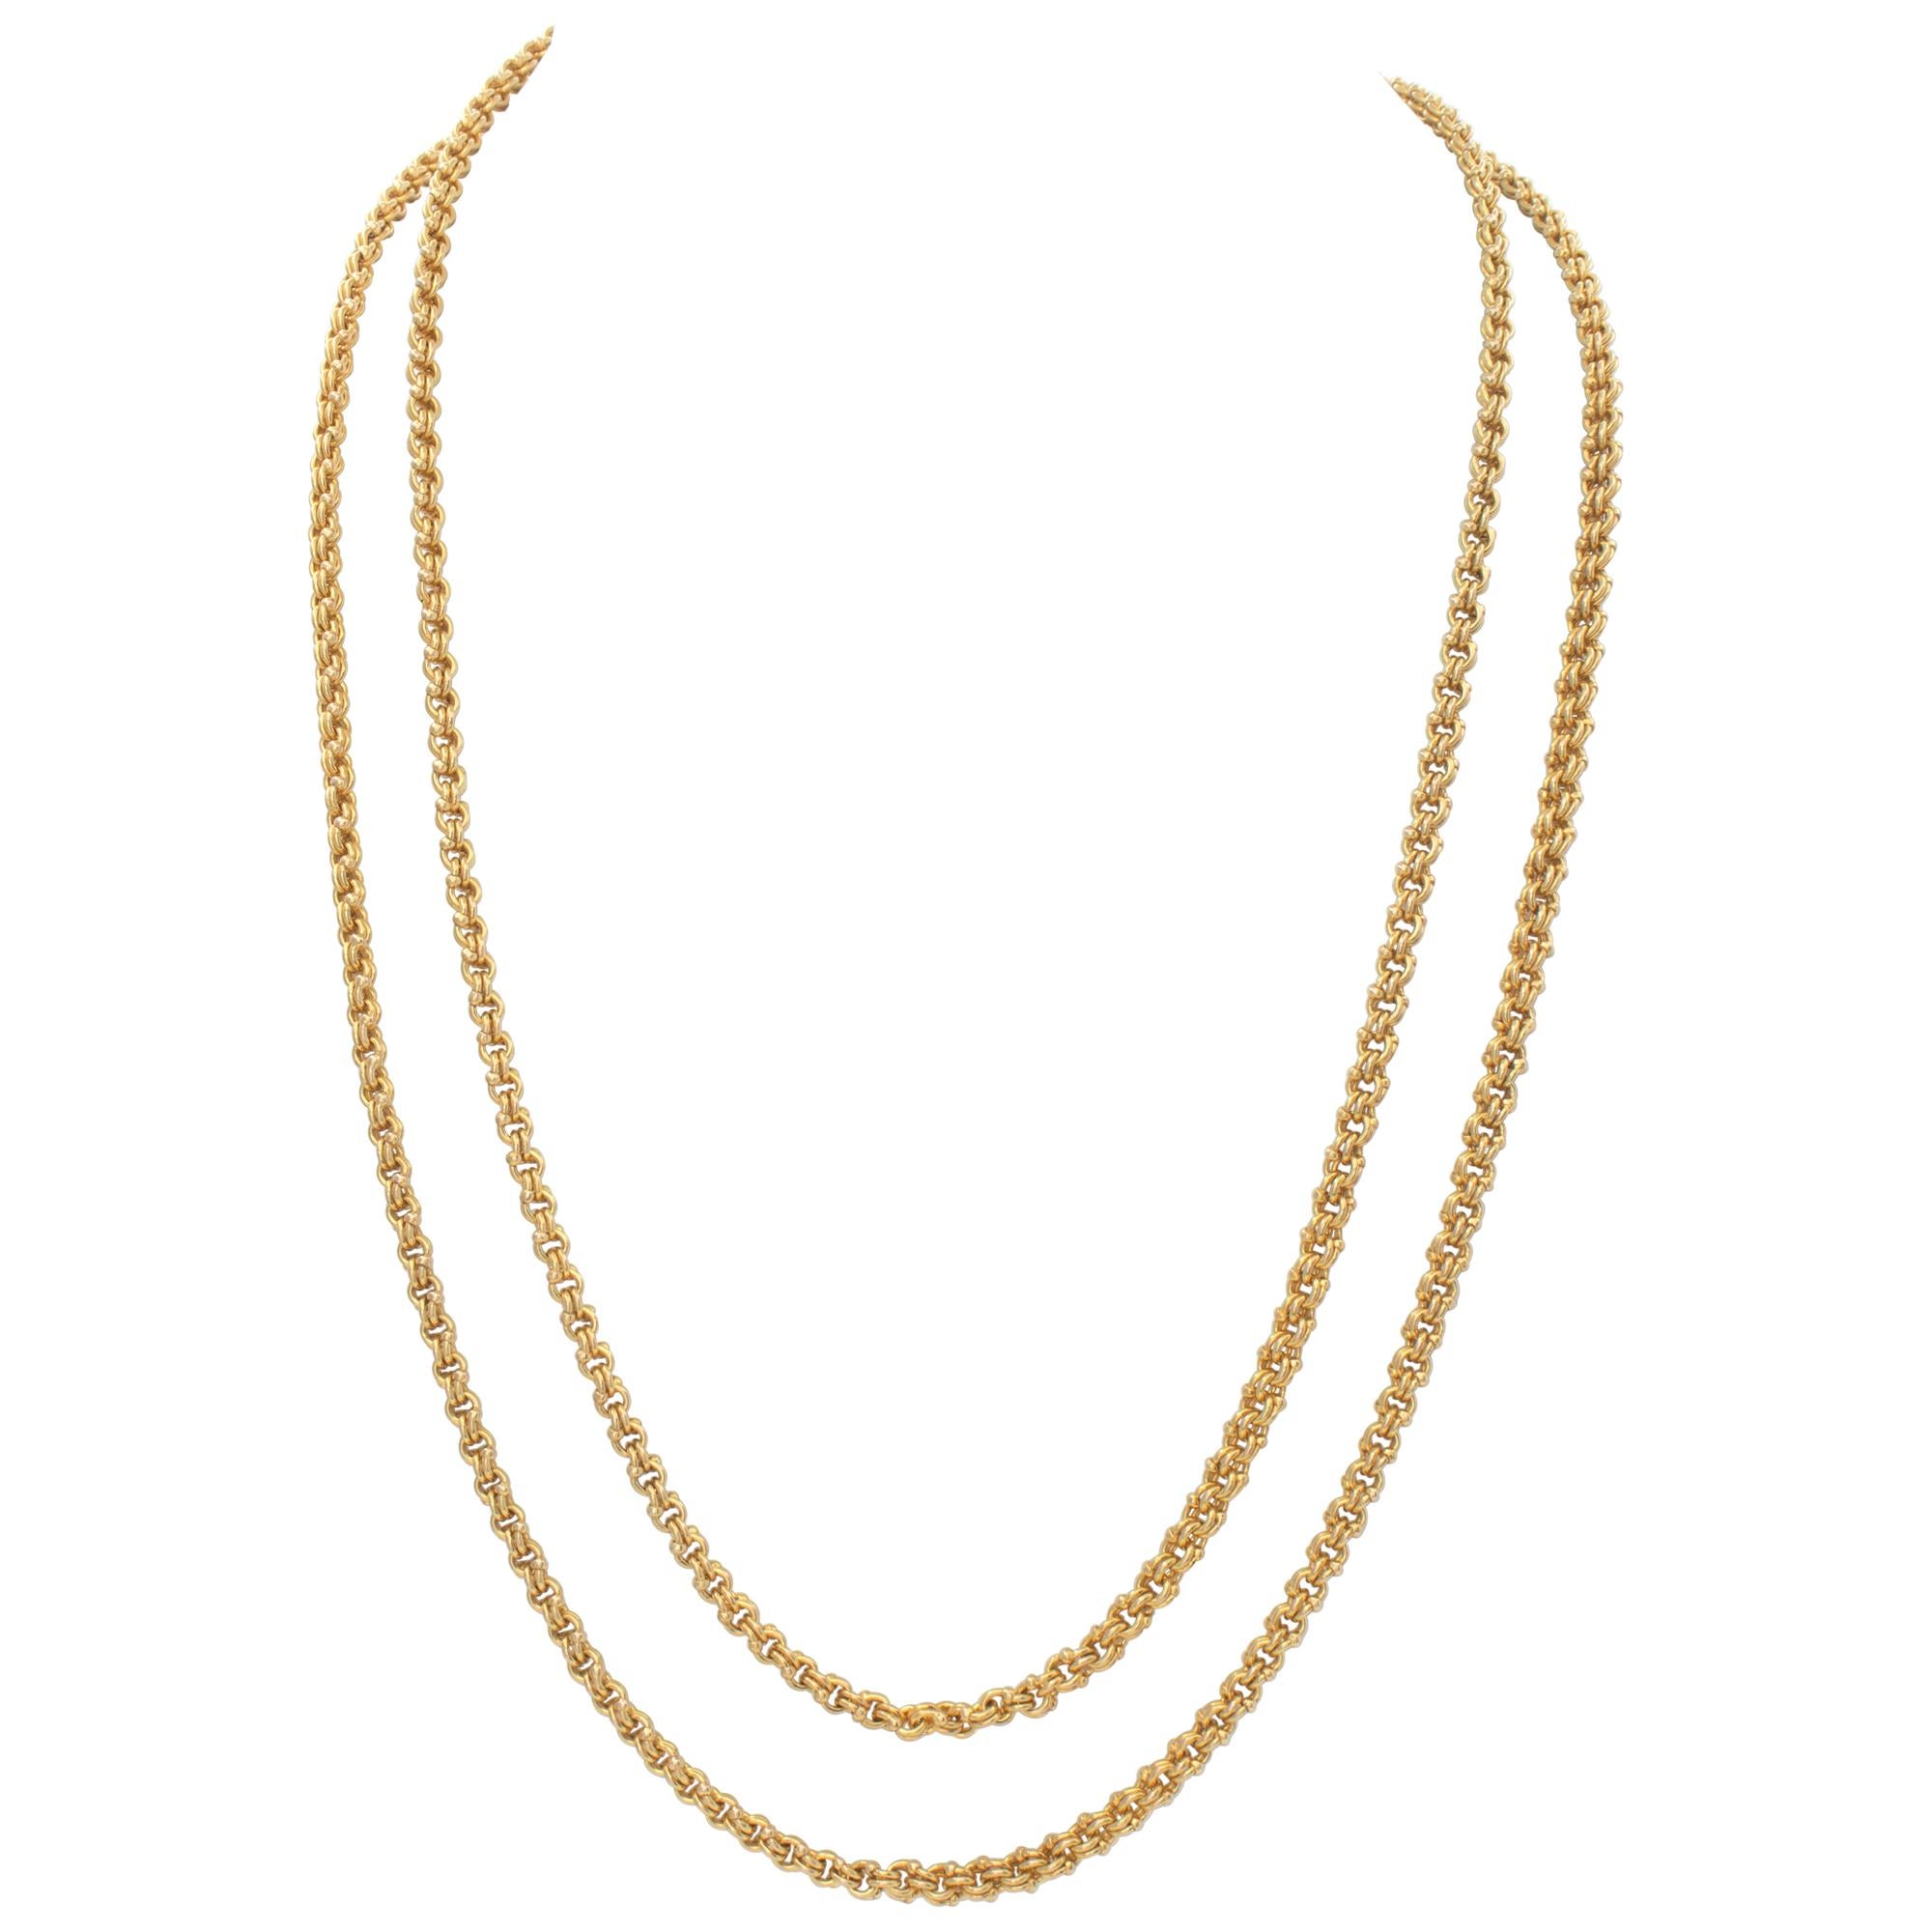 Vintage & versitile! wear with this necklace of made up of tightly woven 14k yellow gold links many different ways! Can be worn with an Opera length 62